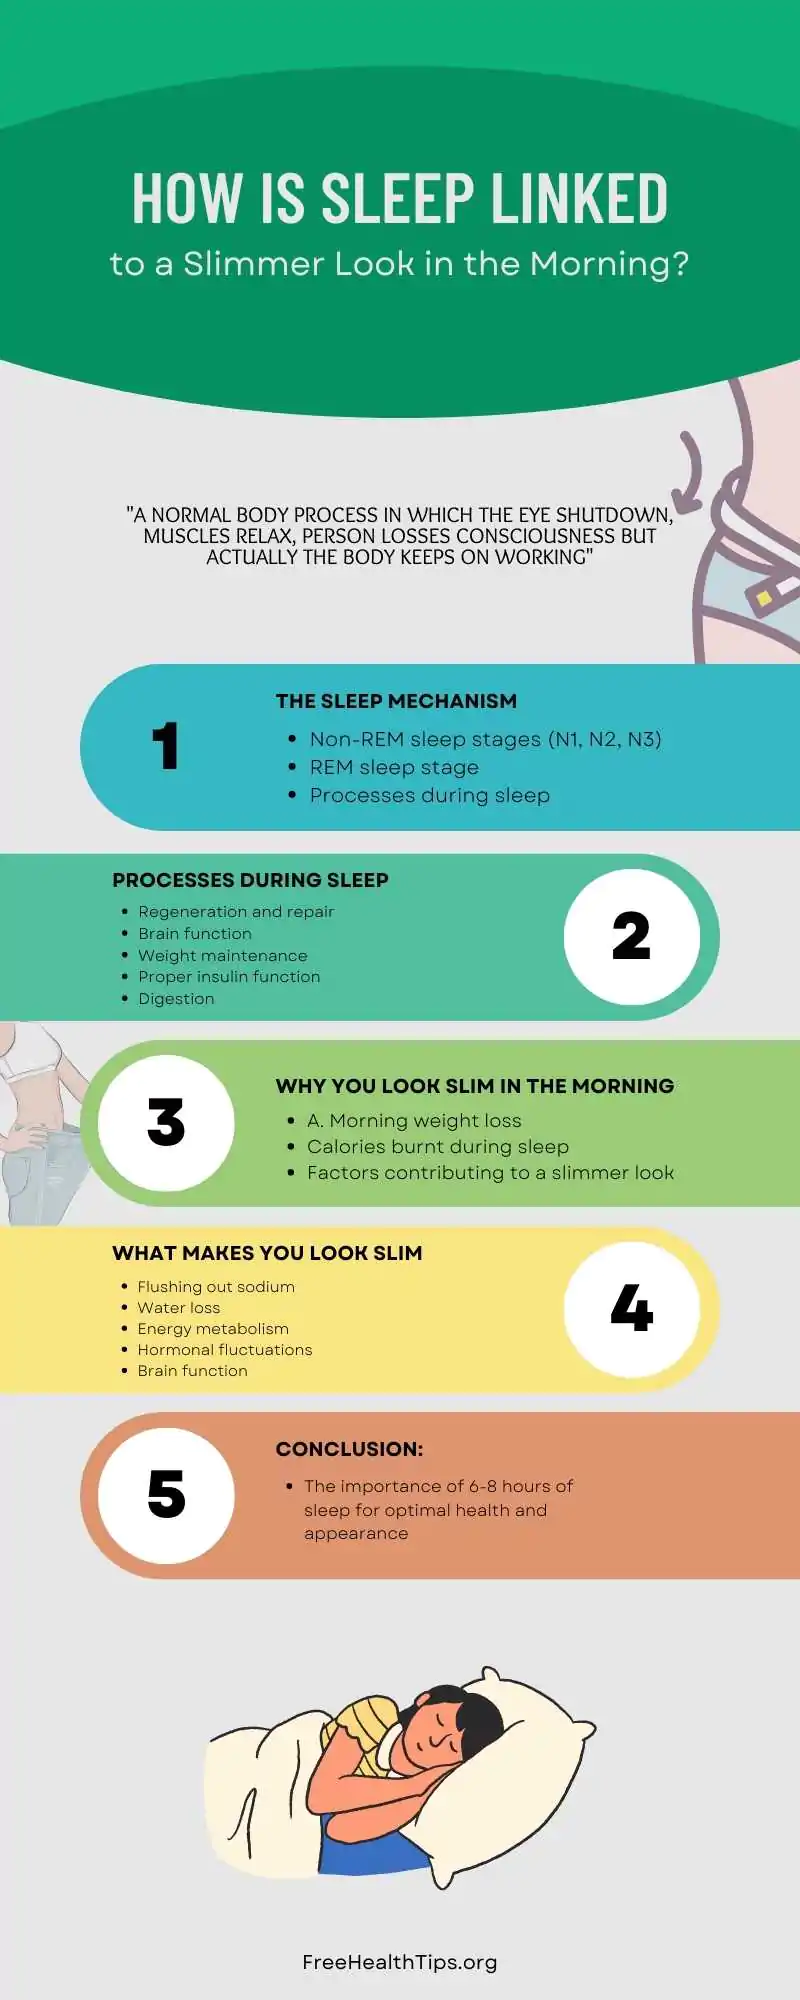 Slimmer Look in the Morning Infographic